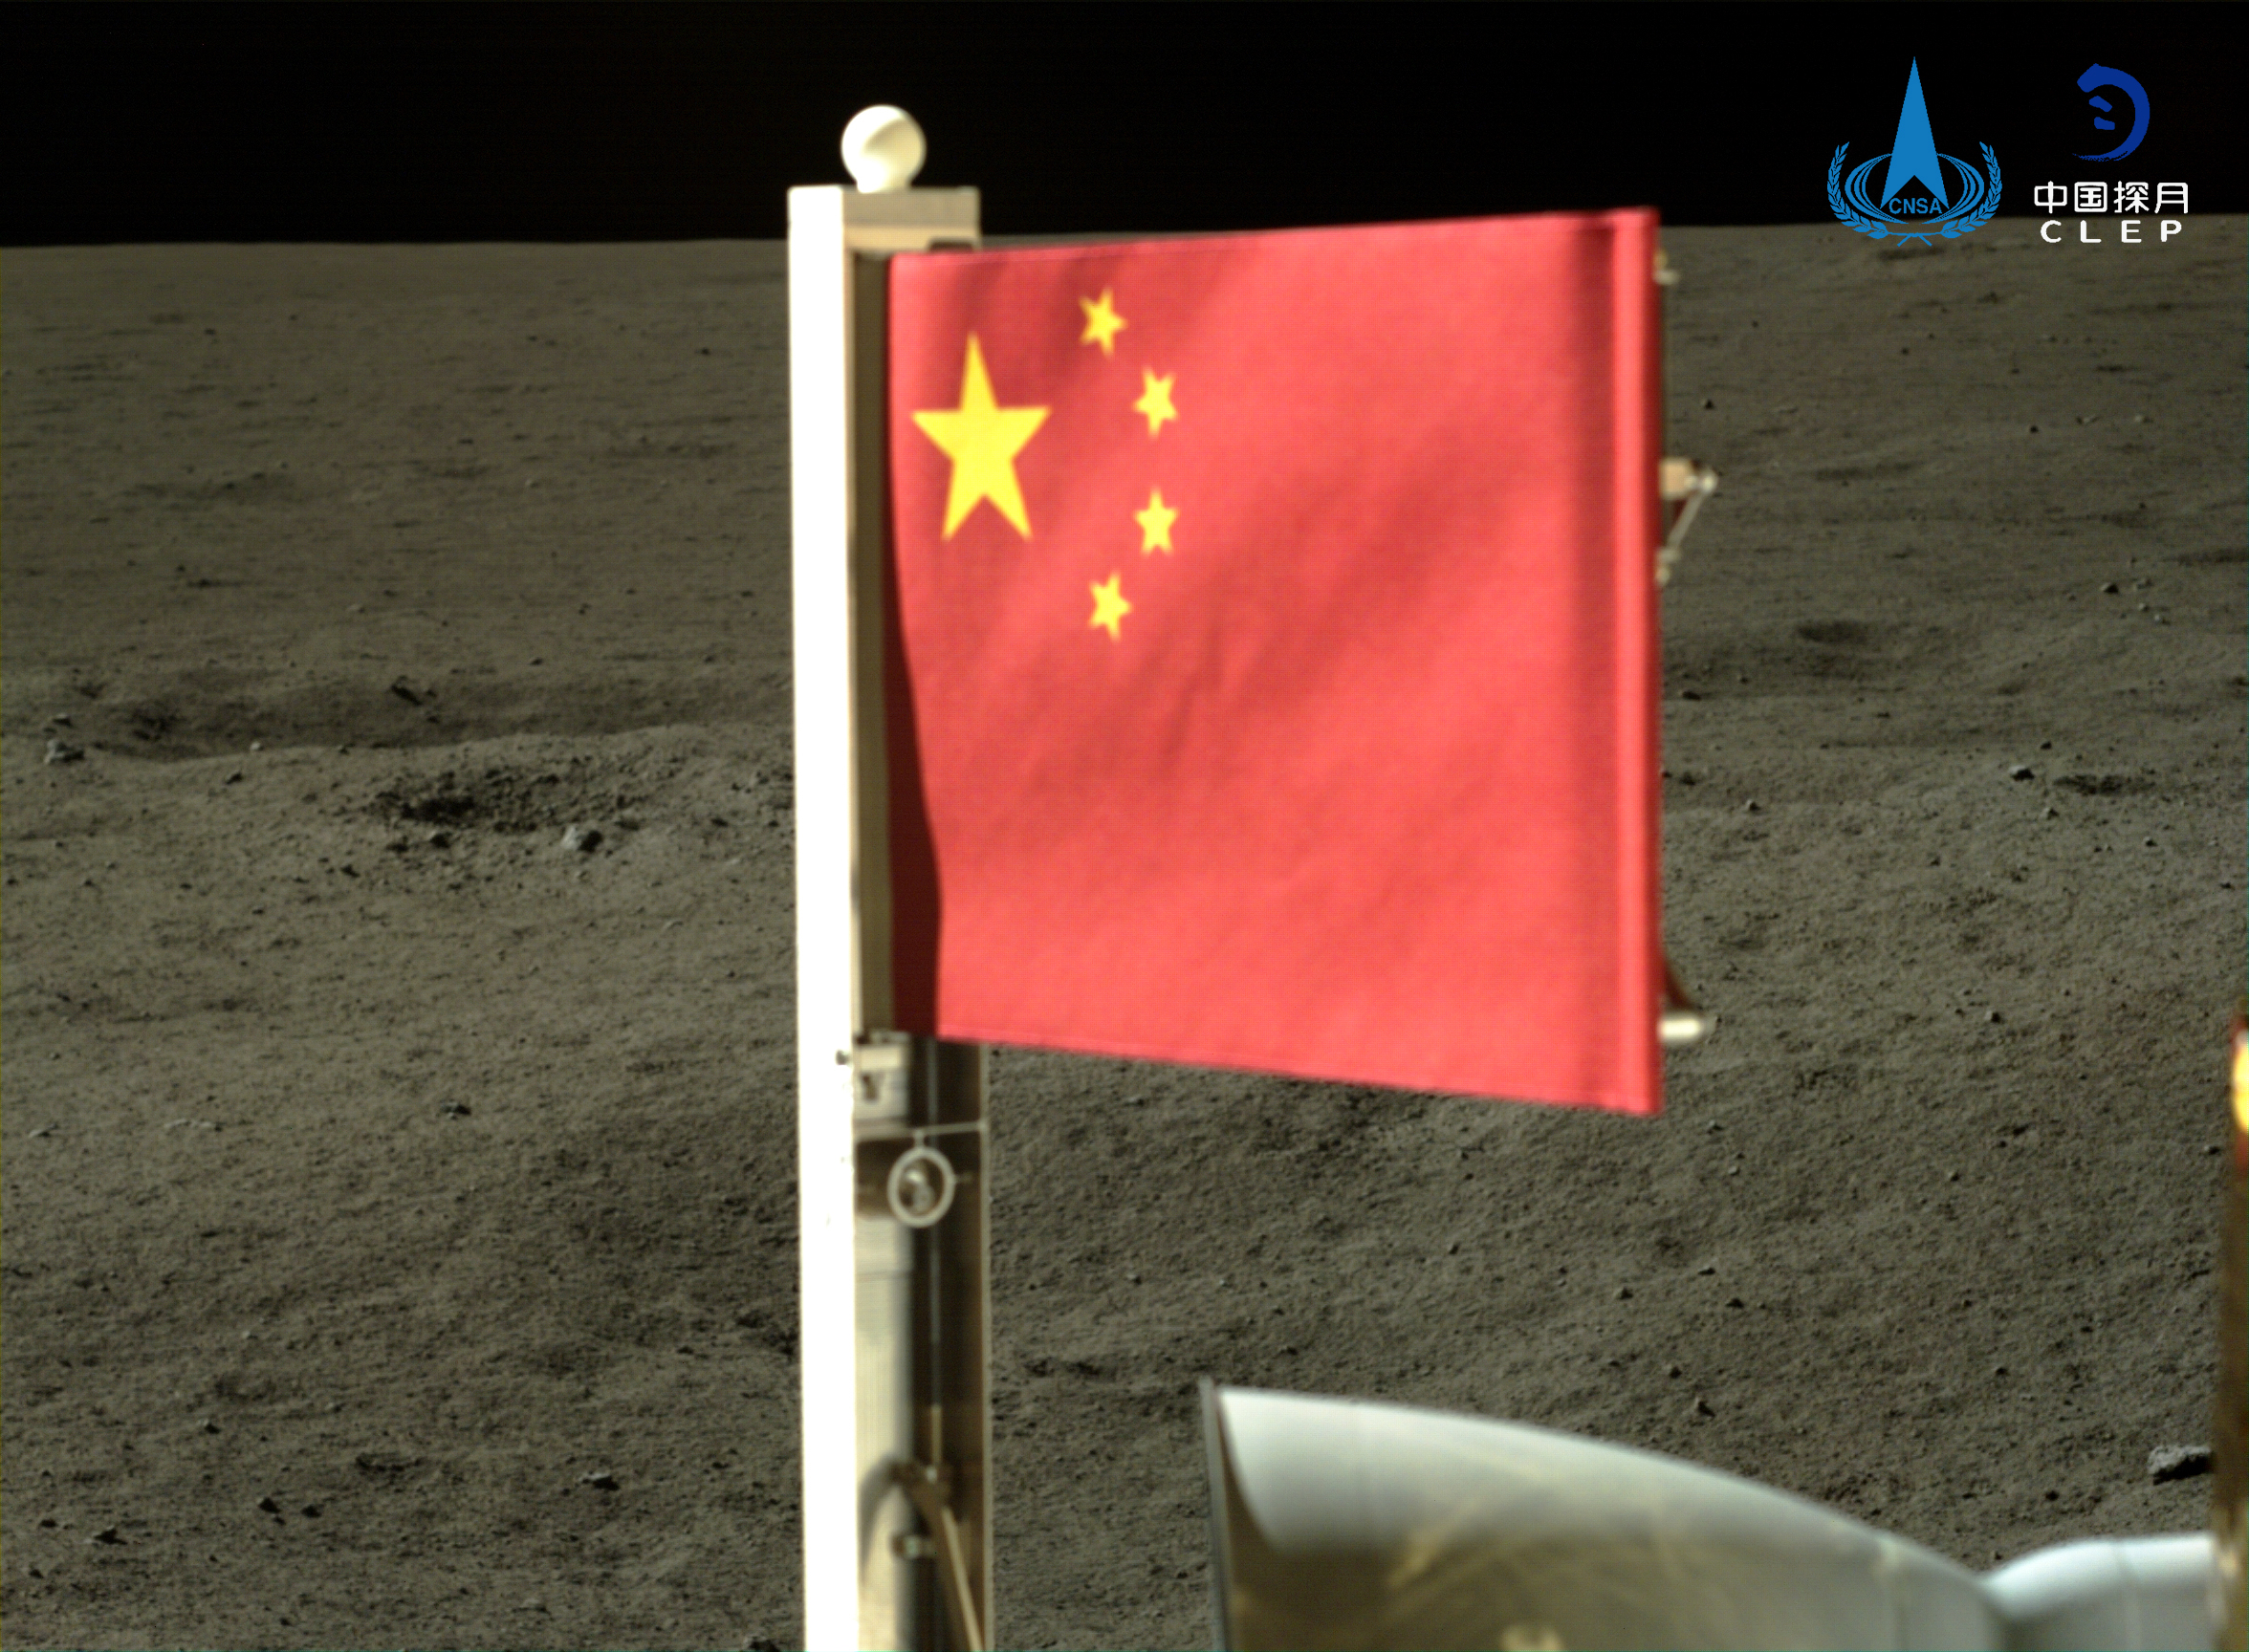 Chang'e 6 captured this image of the Chinese Flag on the Moon surface.